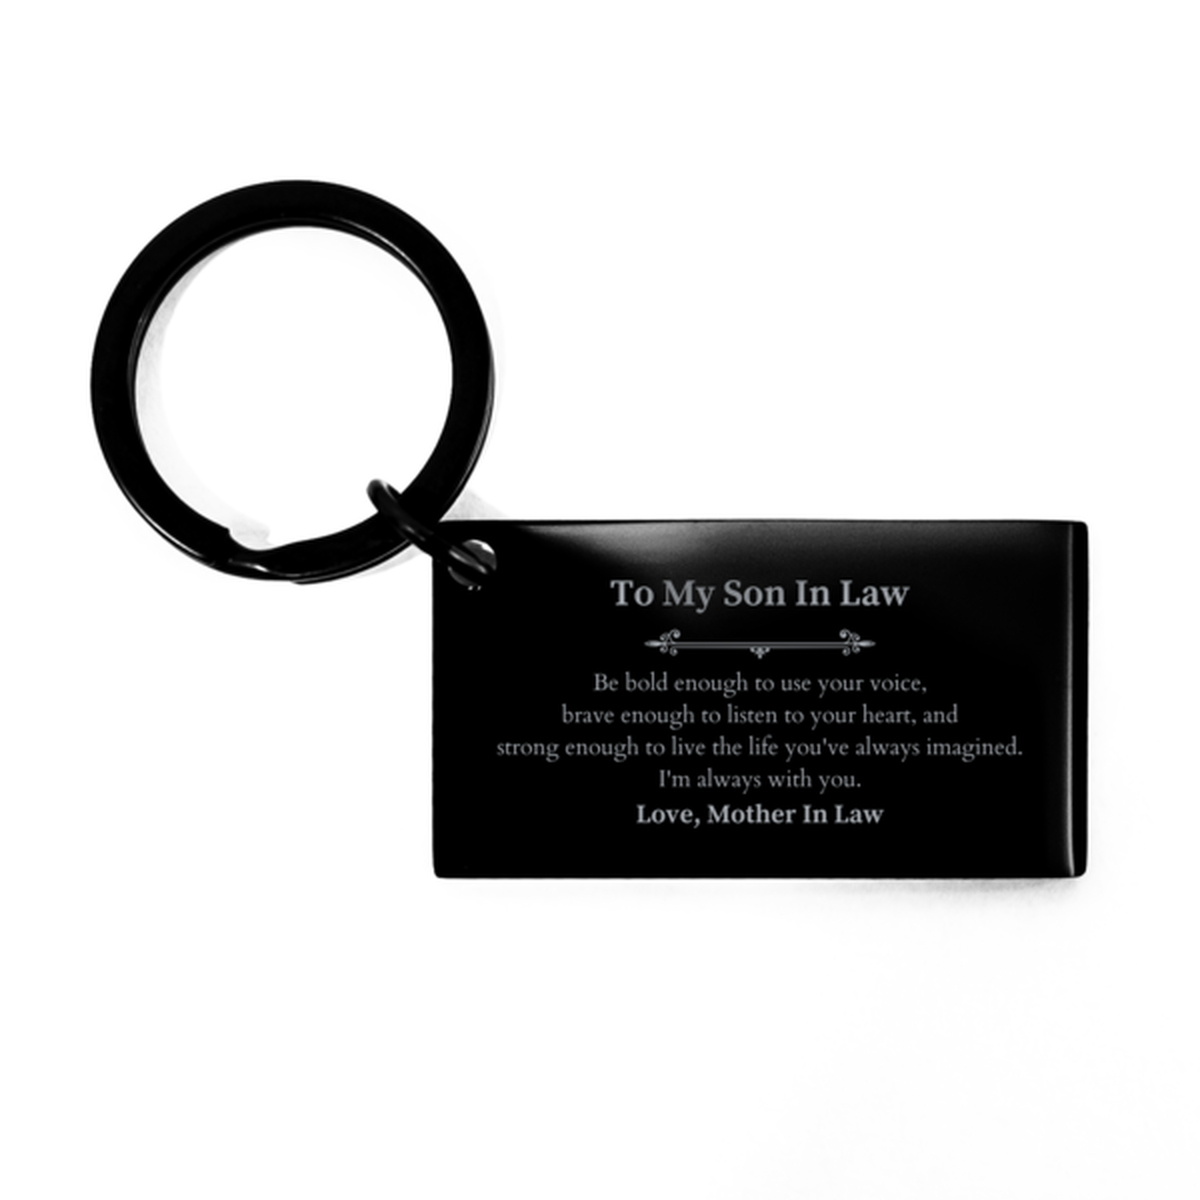 Keepsake Son In Law Keychain Gift Idea Graduation Christmas Birthday Son In Law from Mother In Law, Son In Law Be bold enough to use your voice, brave enough to listen to your heart. Love, Mother In Law